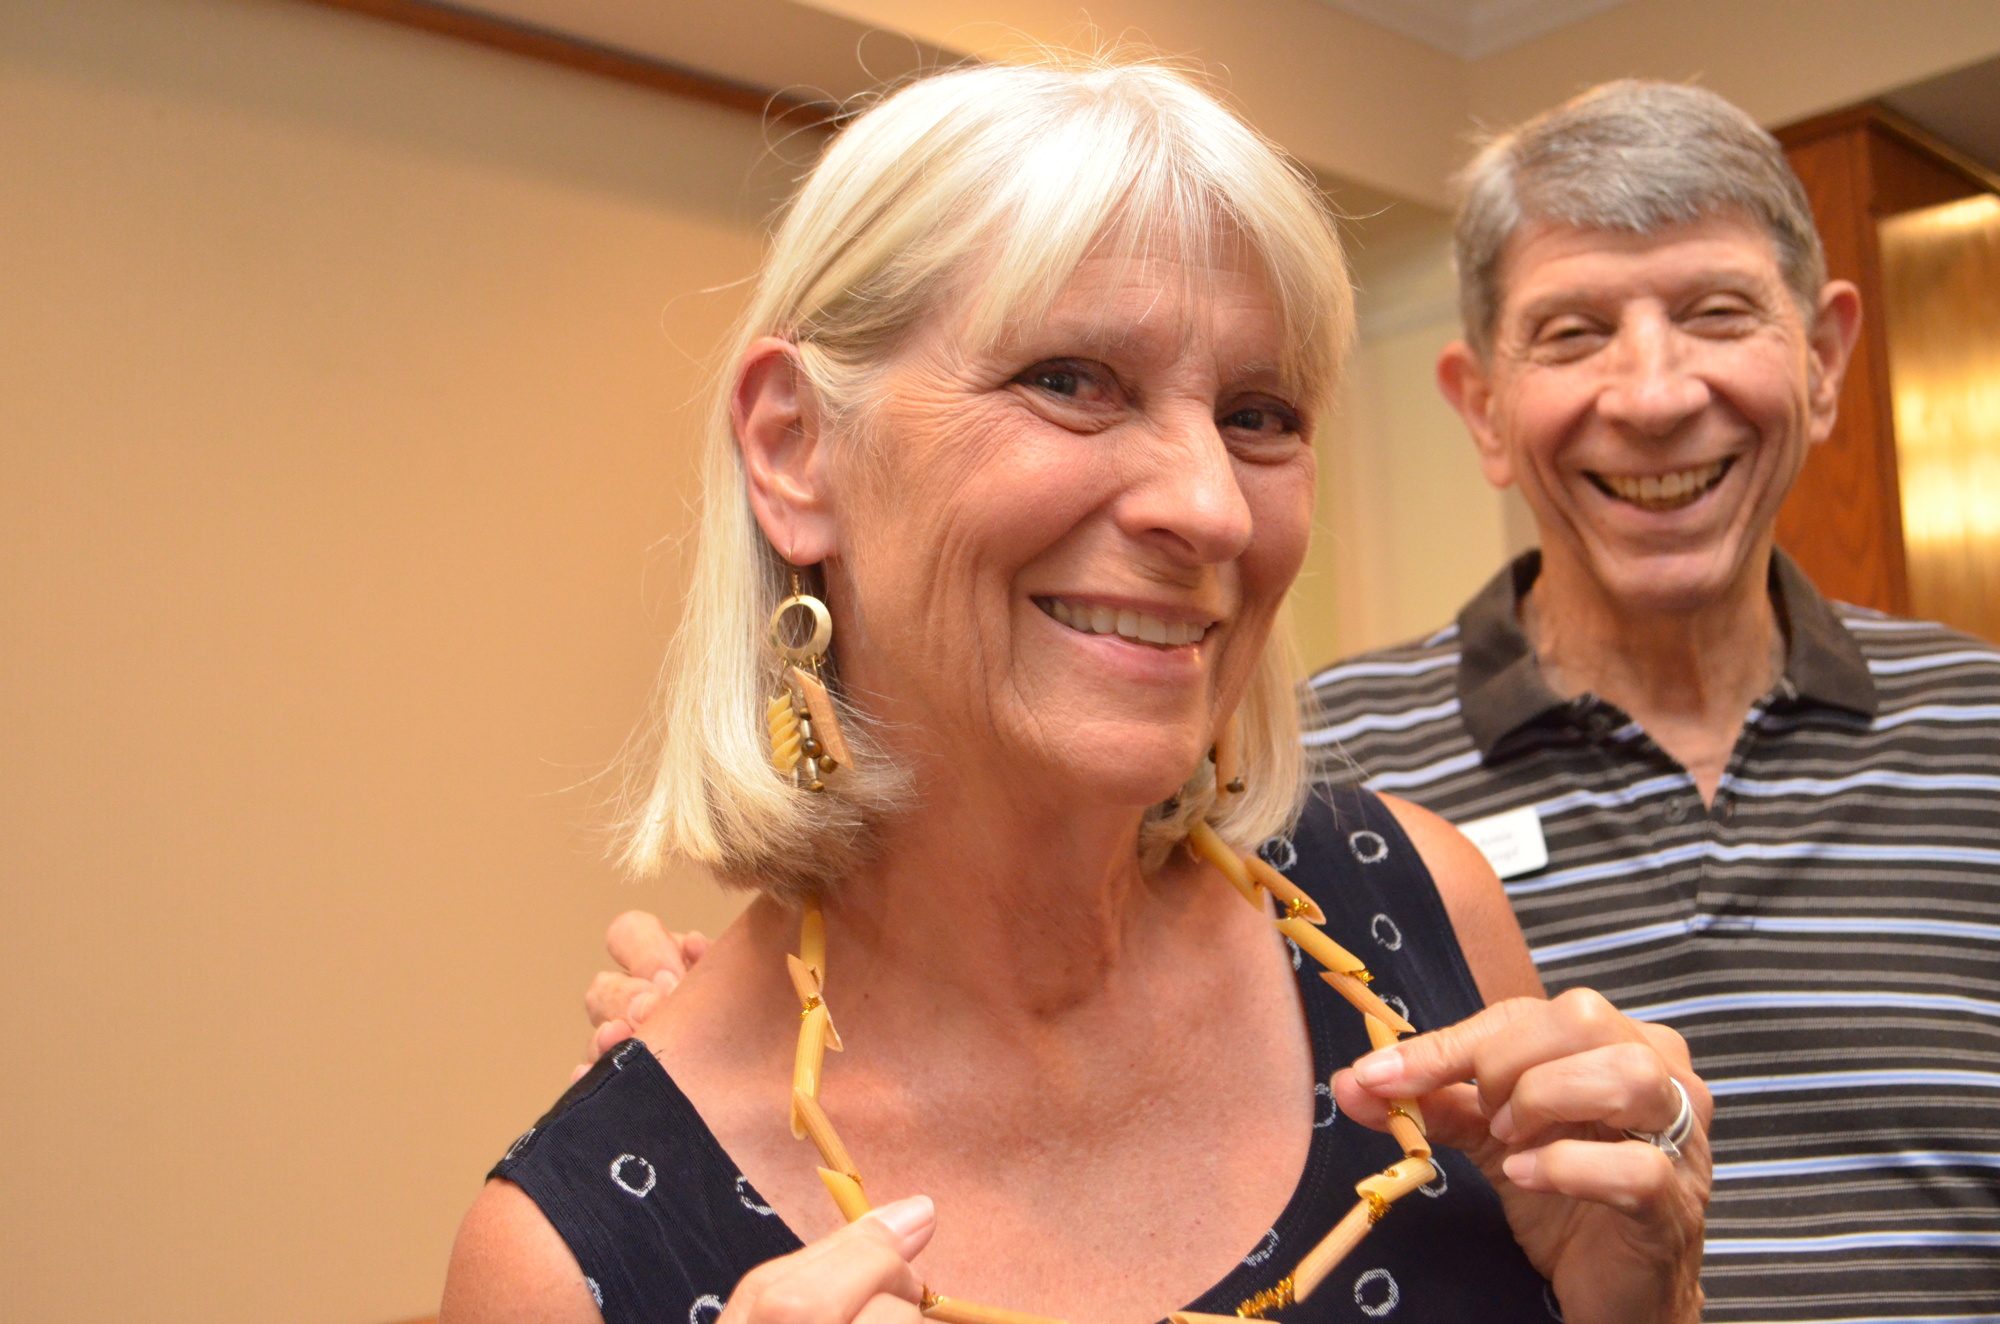 Dee Kropf shows off her penne necklace and pasta earrings.